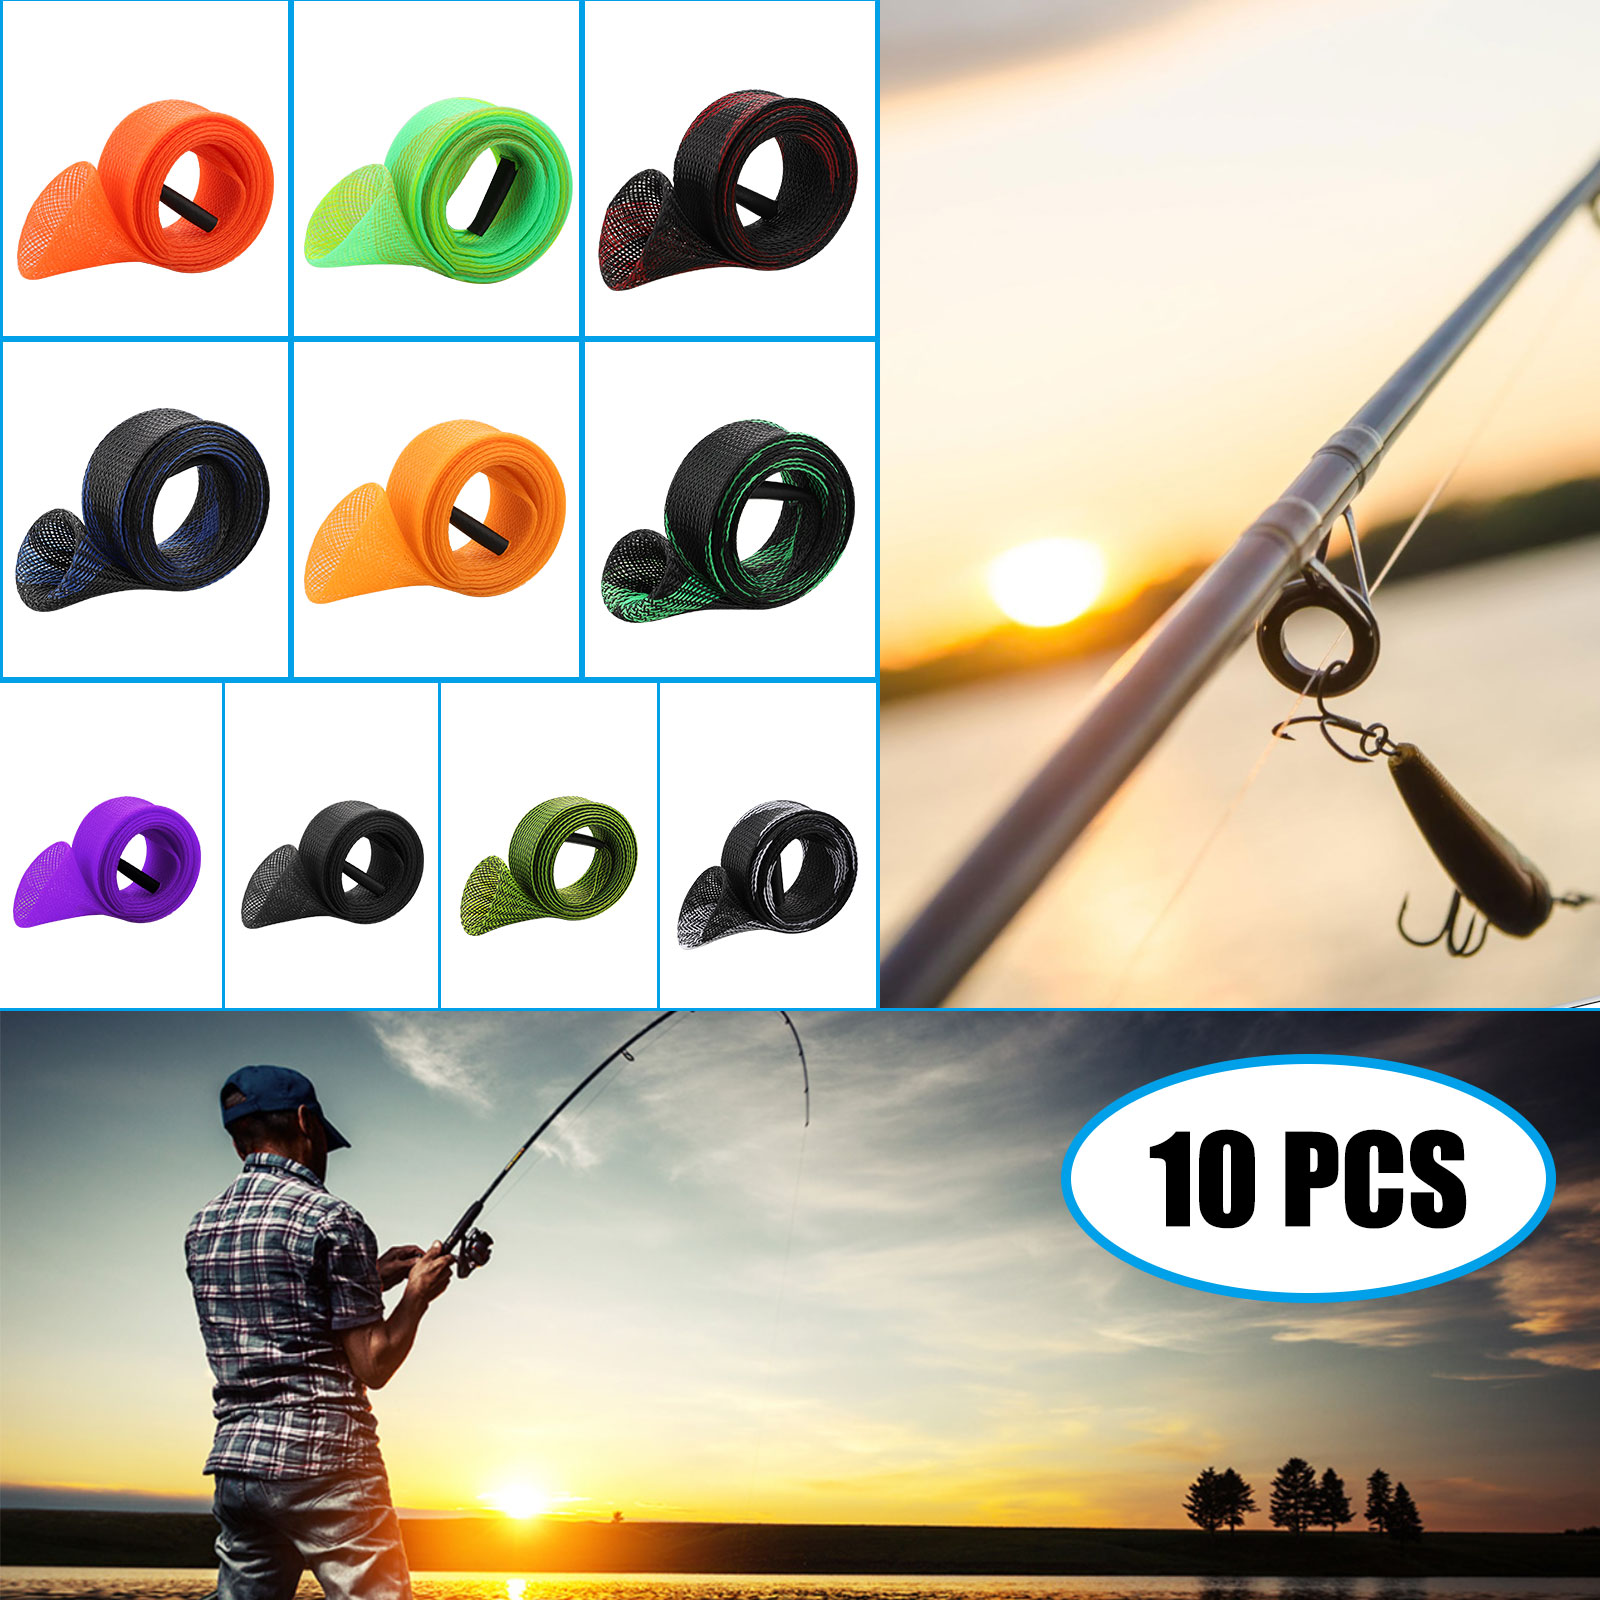 How To Use A Fishing Rod